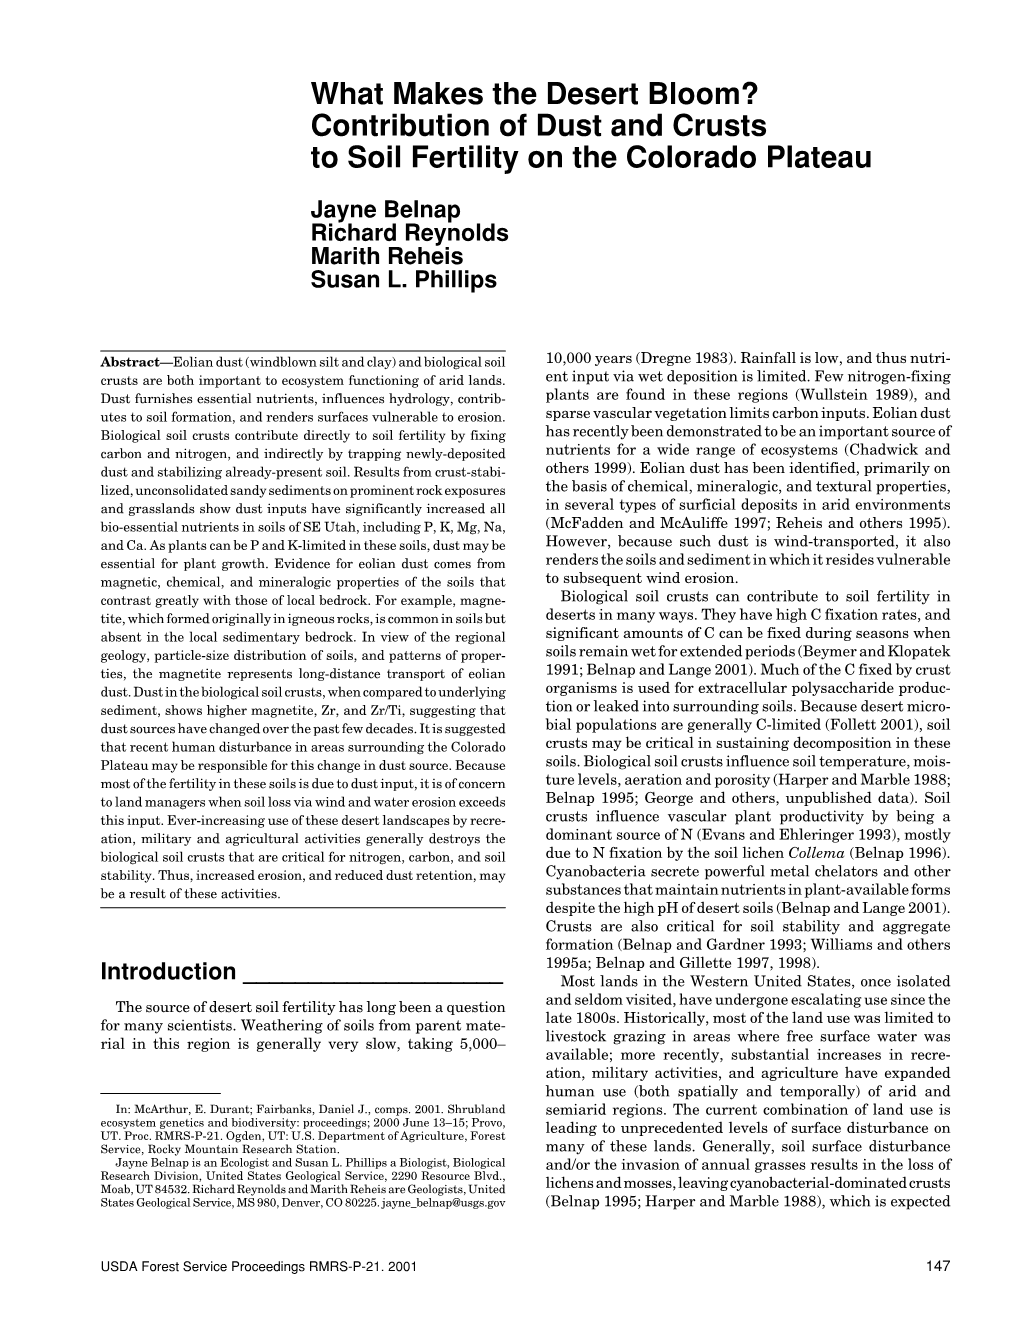 Contribution of Dust and Crusts to Soil Fertility on the Colorado Plateau